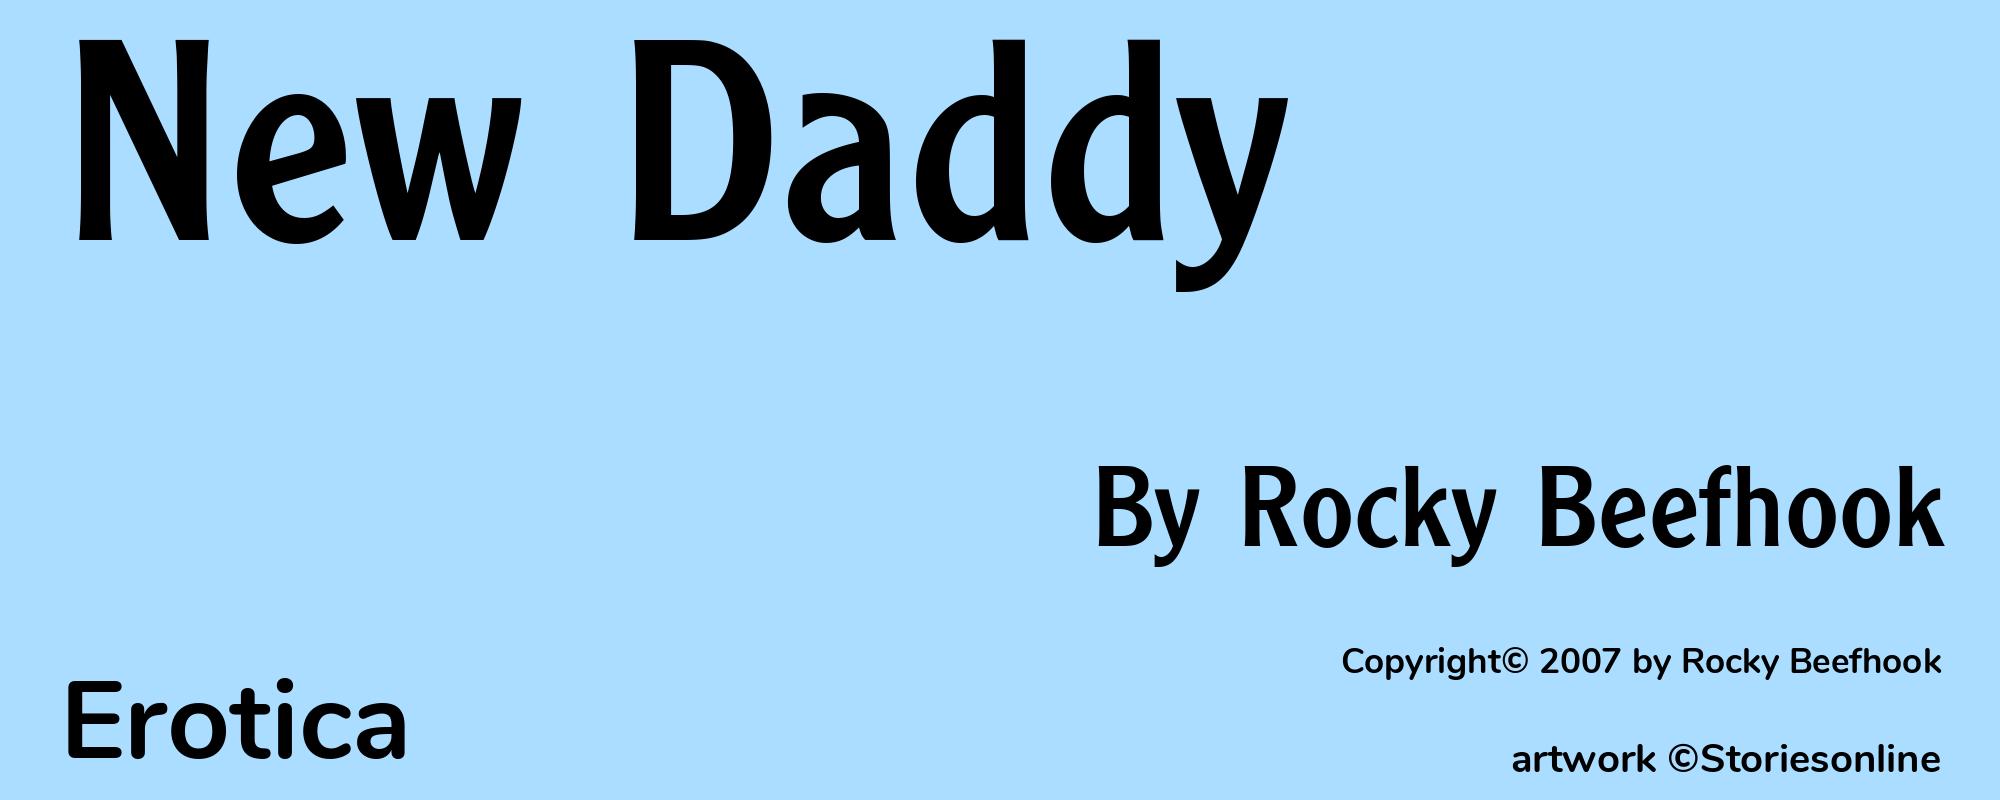 New Daddy - Cover